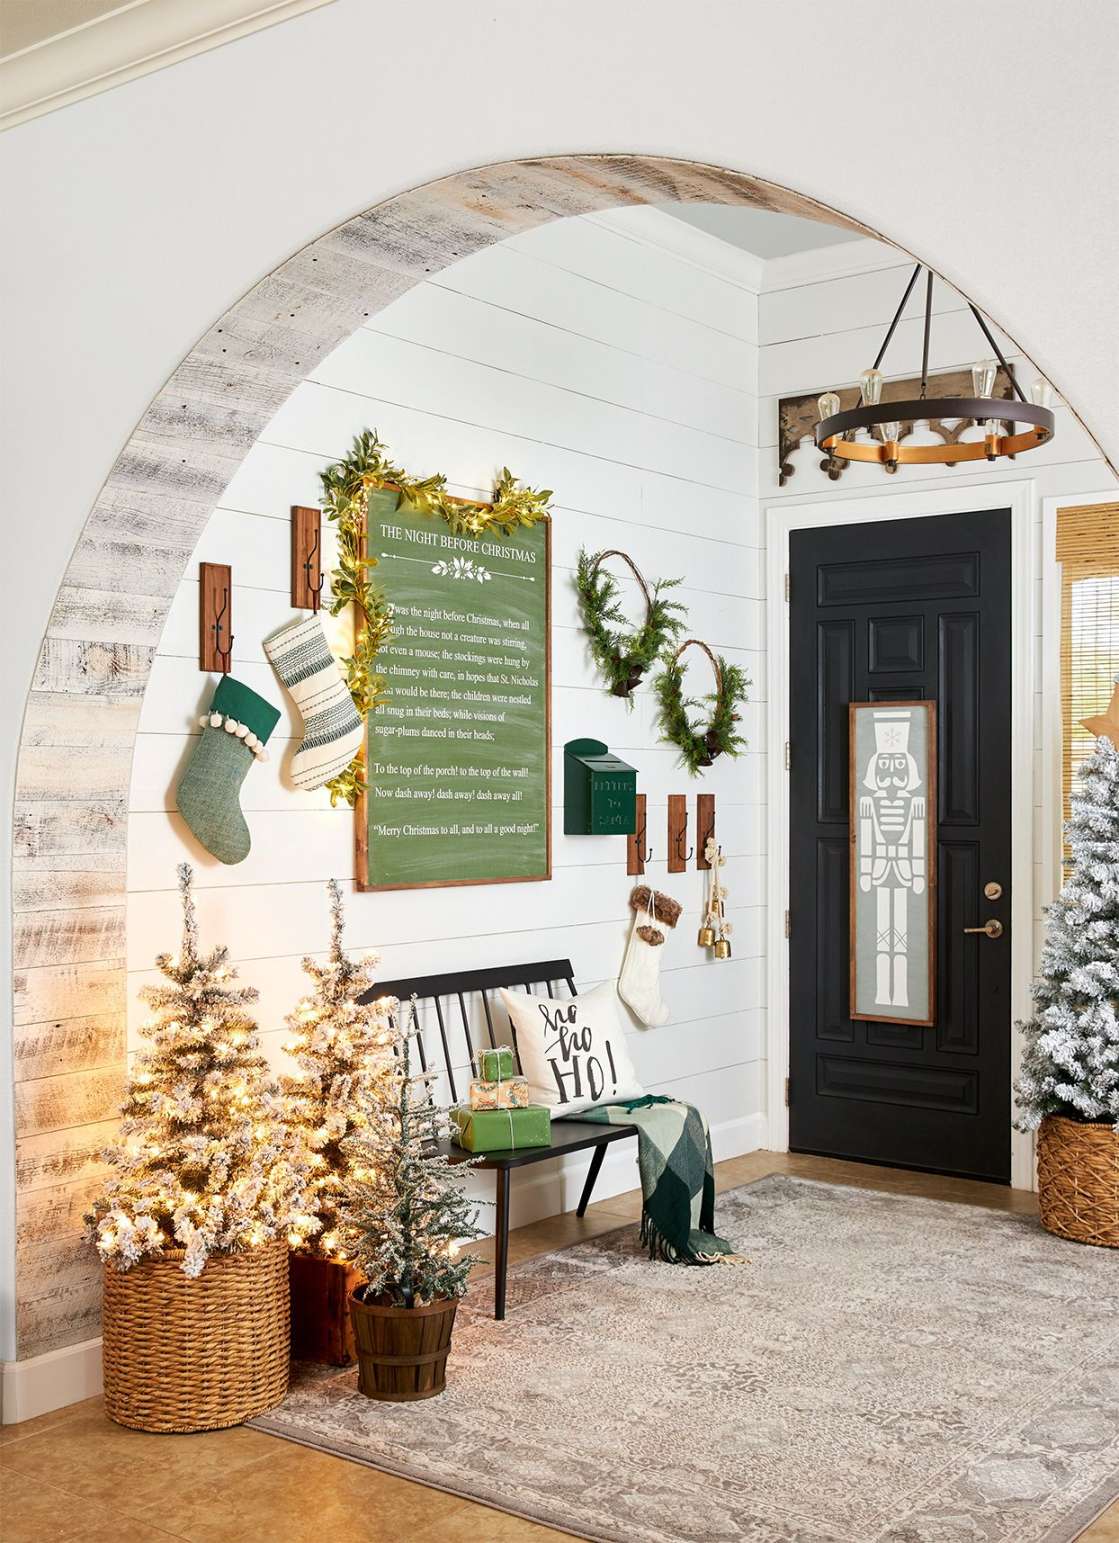 Places to Hang Stockings If Your Home Lacks a Mantel